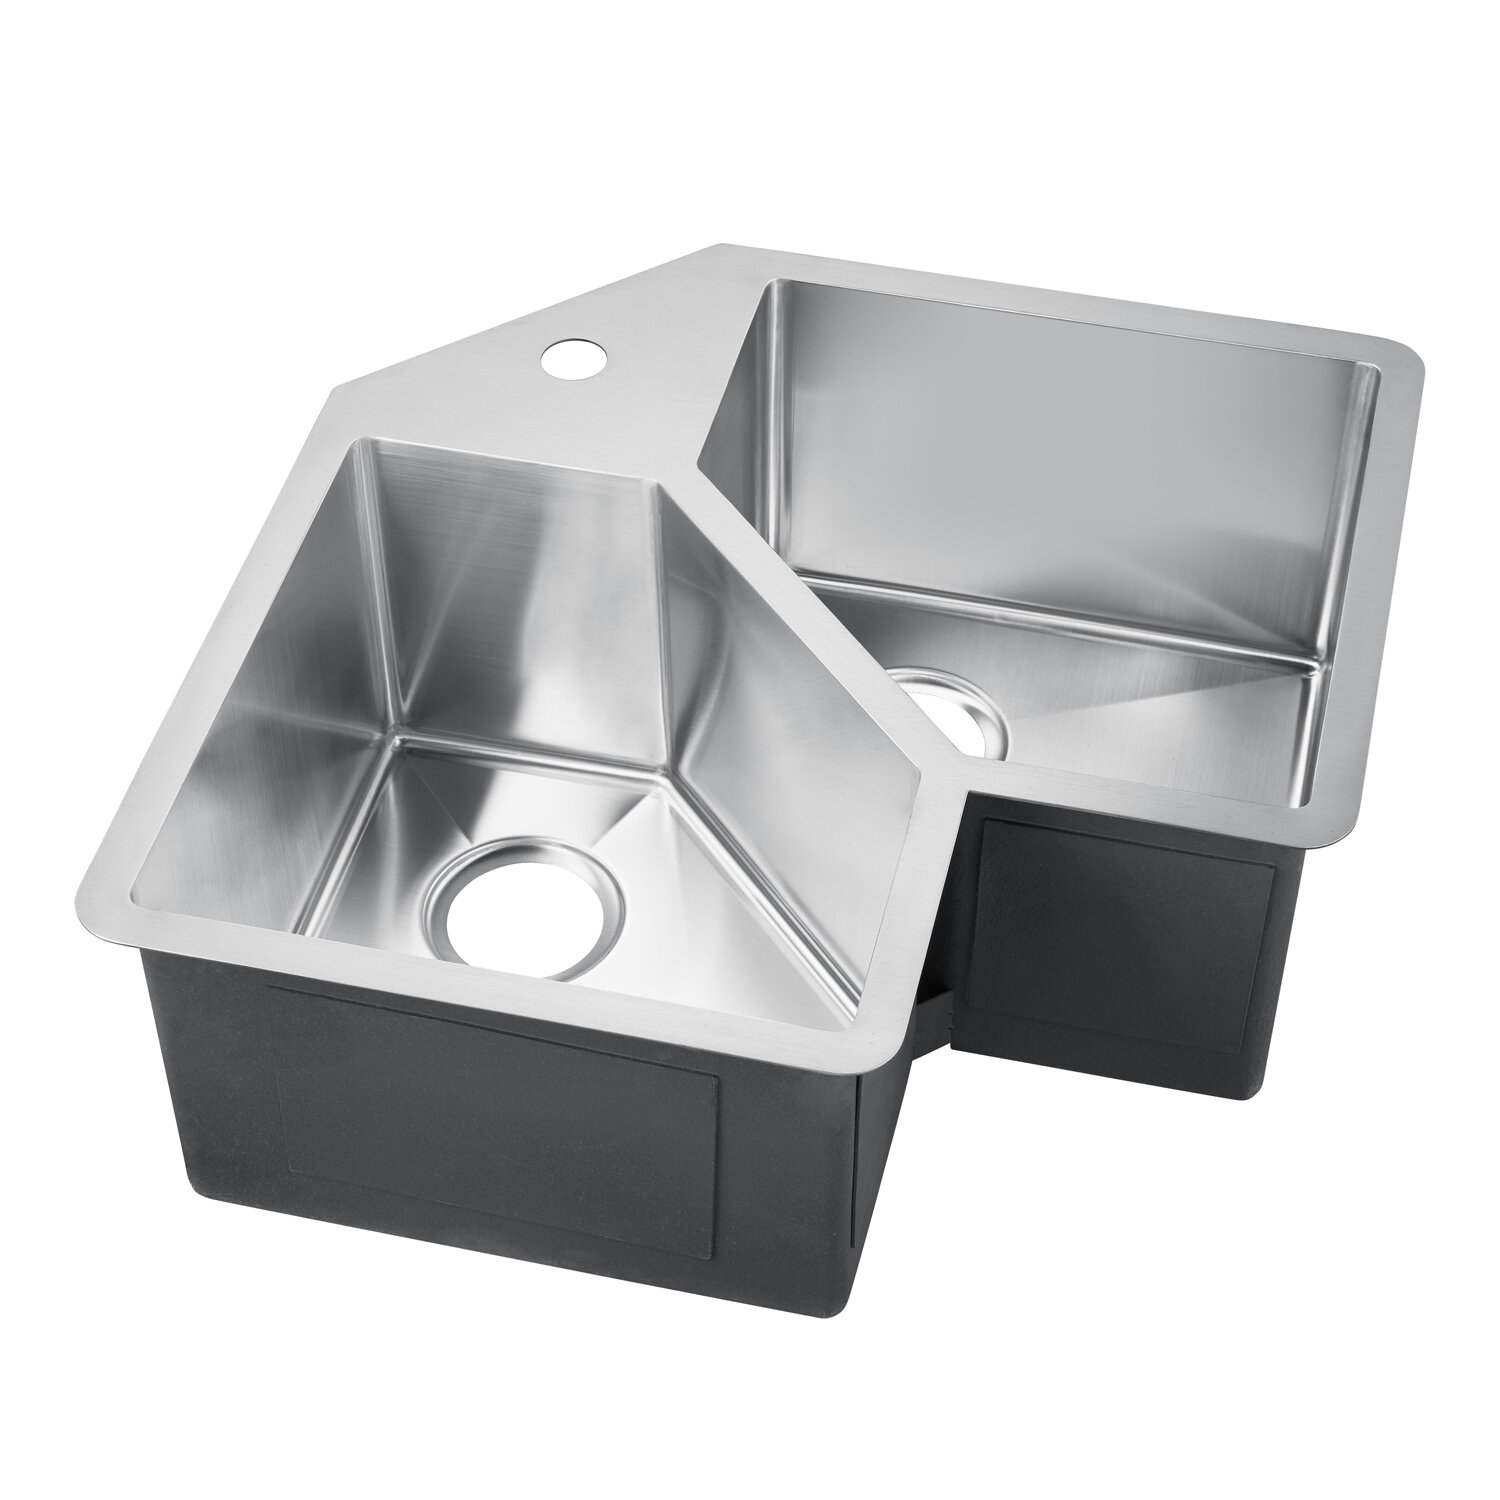 3218br Offset Double Bowl Undermount Stainless Steel Sink